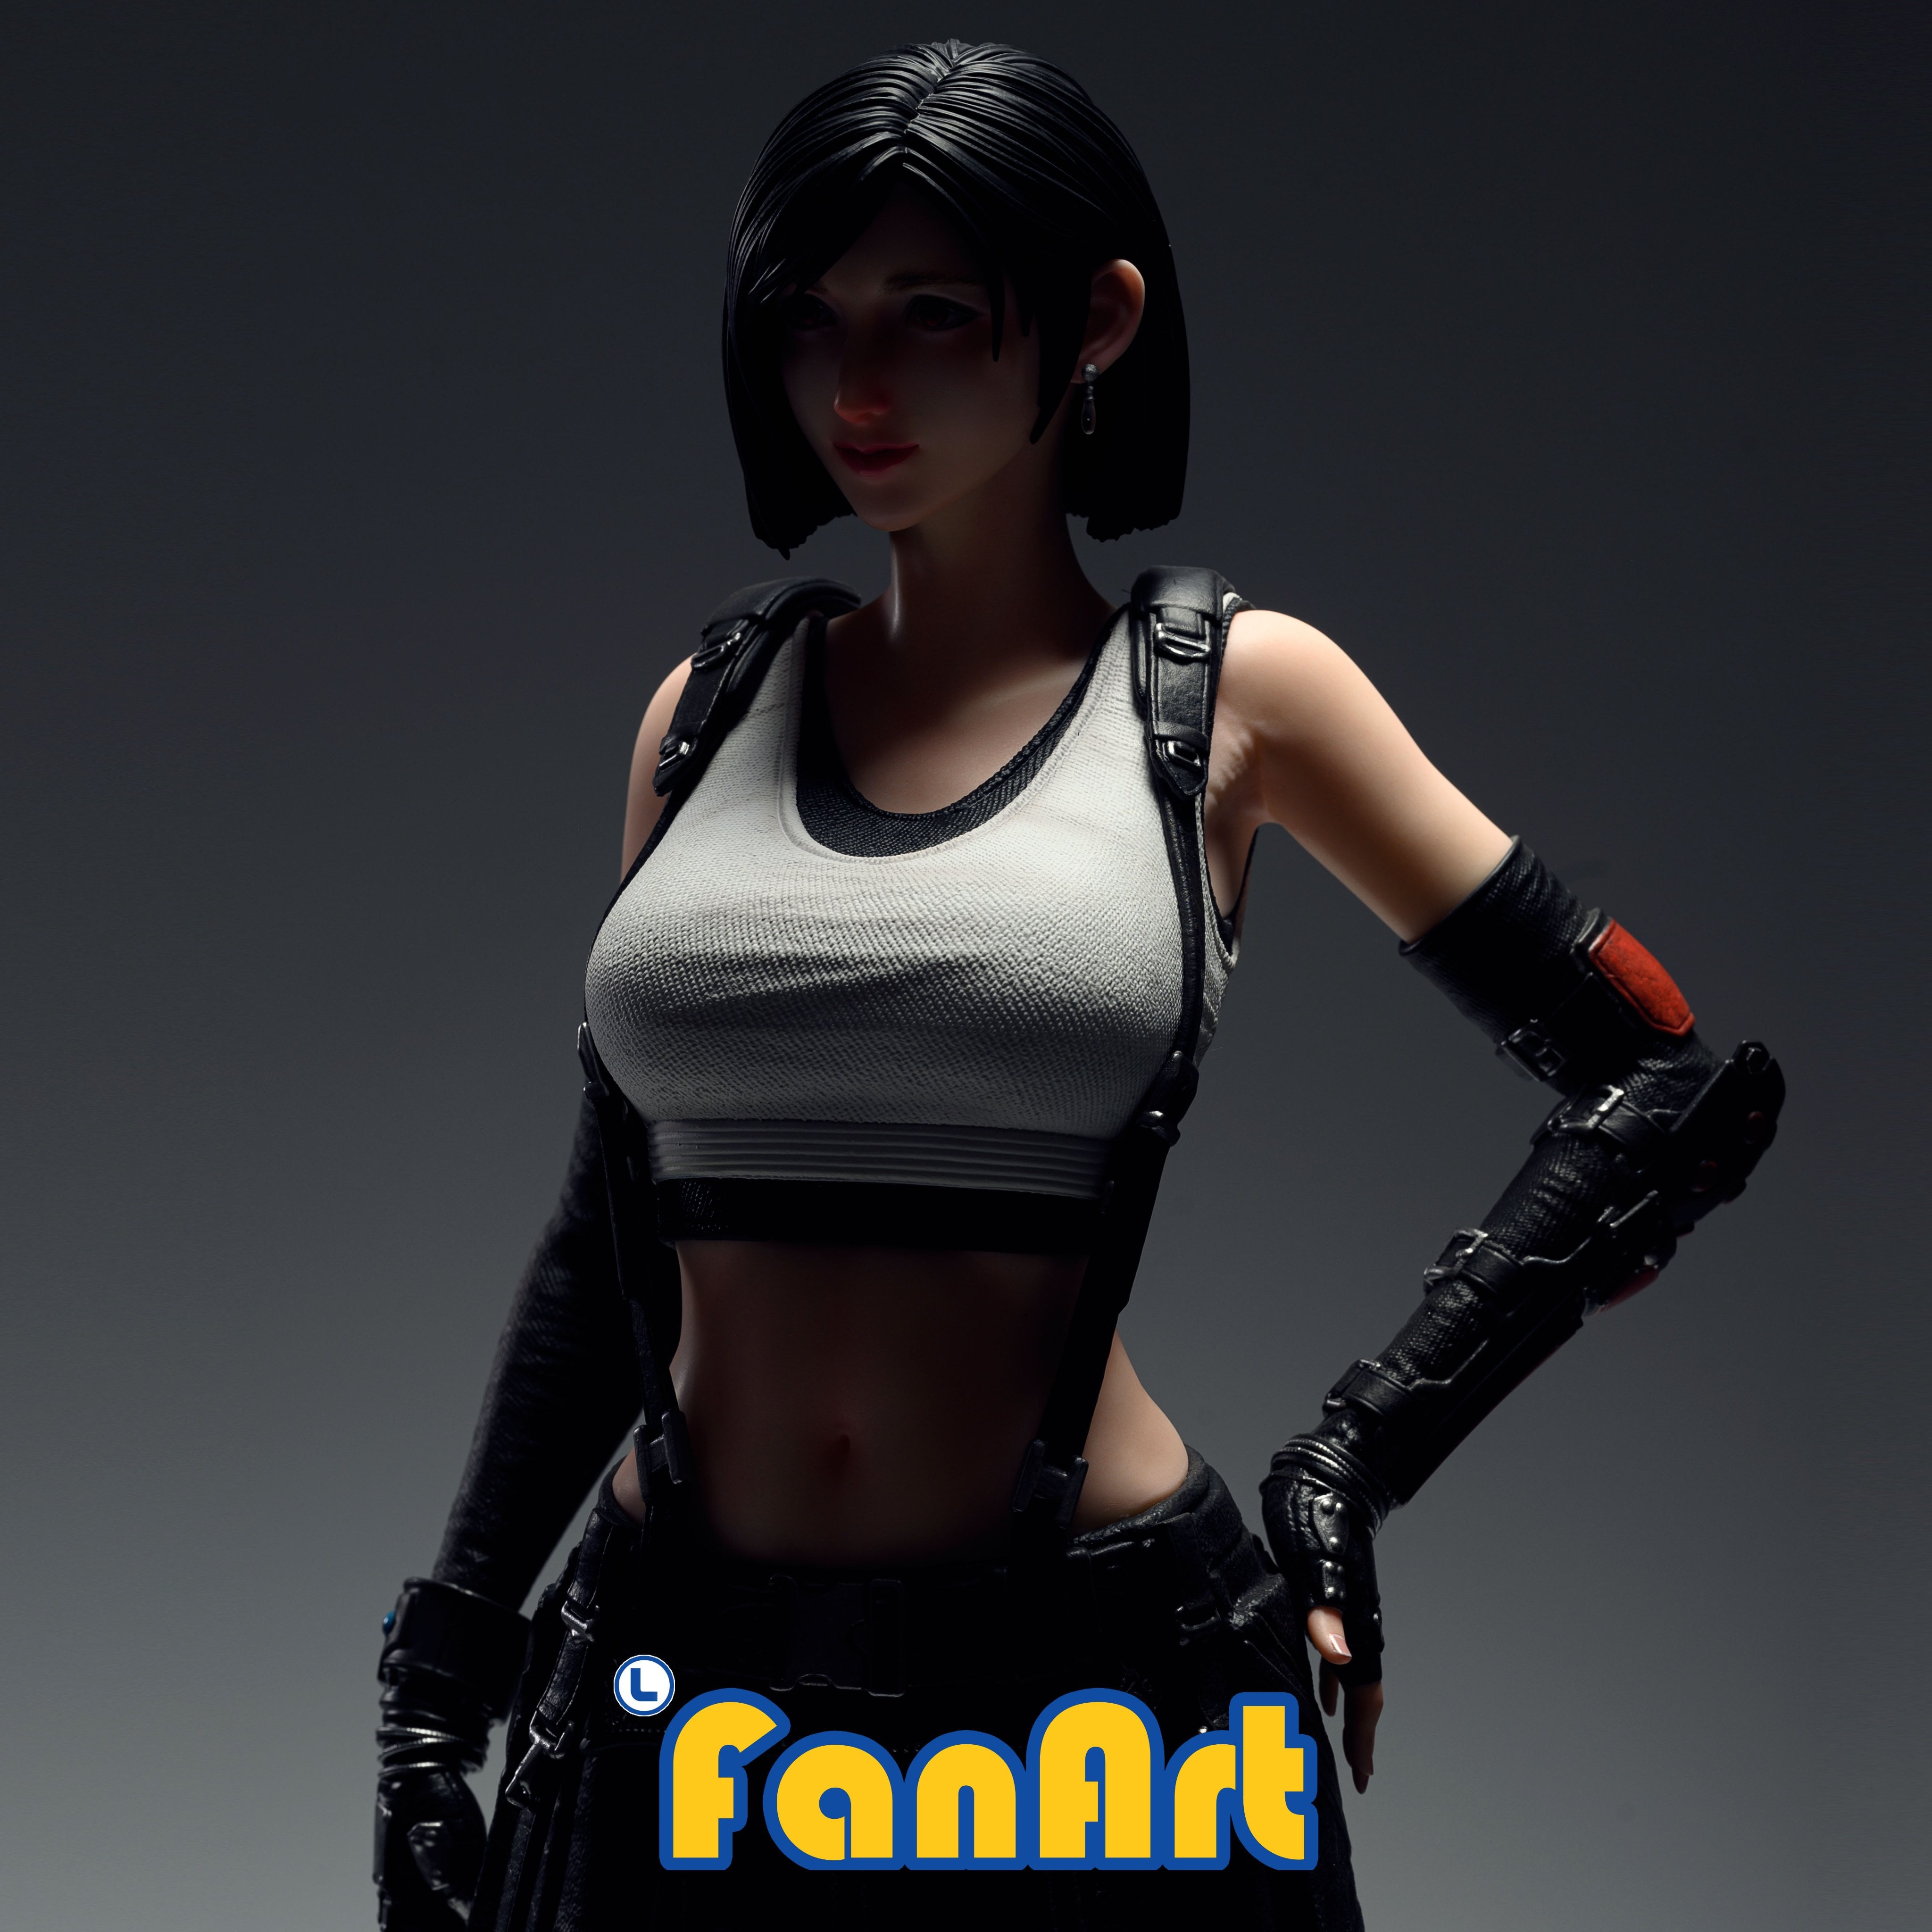 what-your-thoughts-on-these-up-coming-tifa-1-4-v0-xywy61hemtib1.jpg